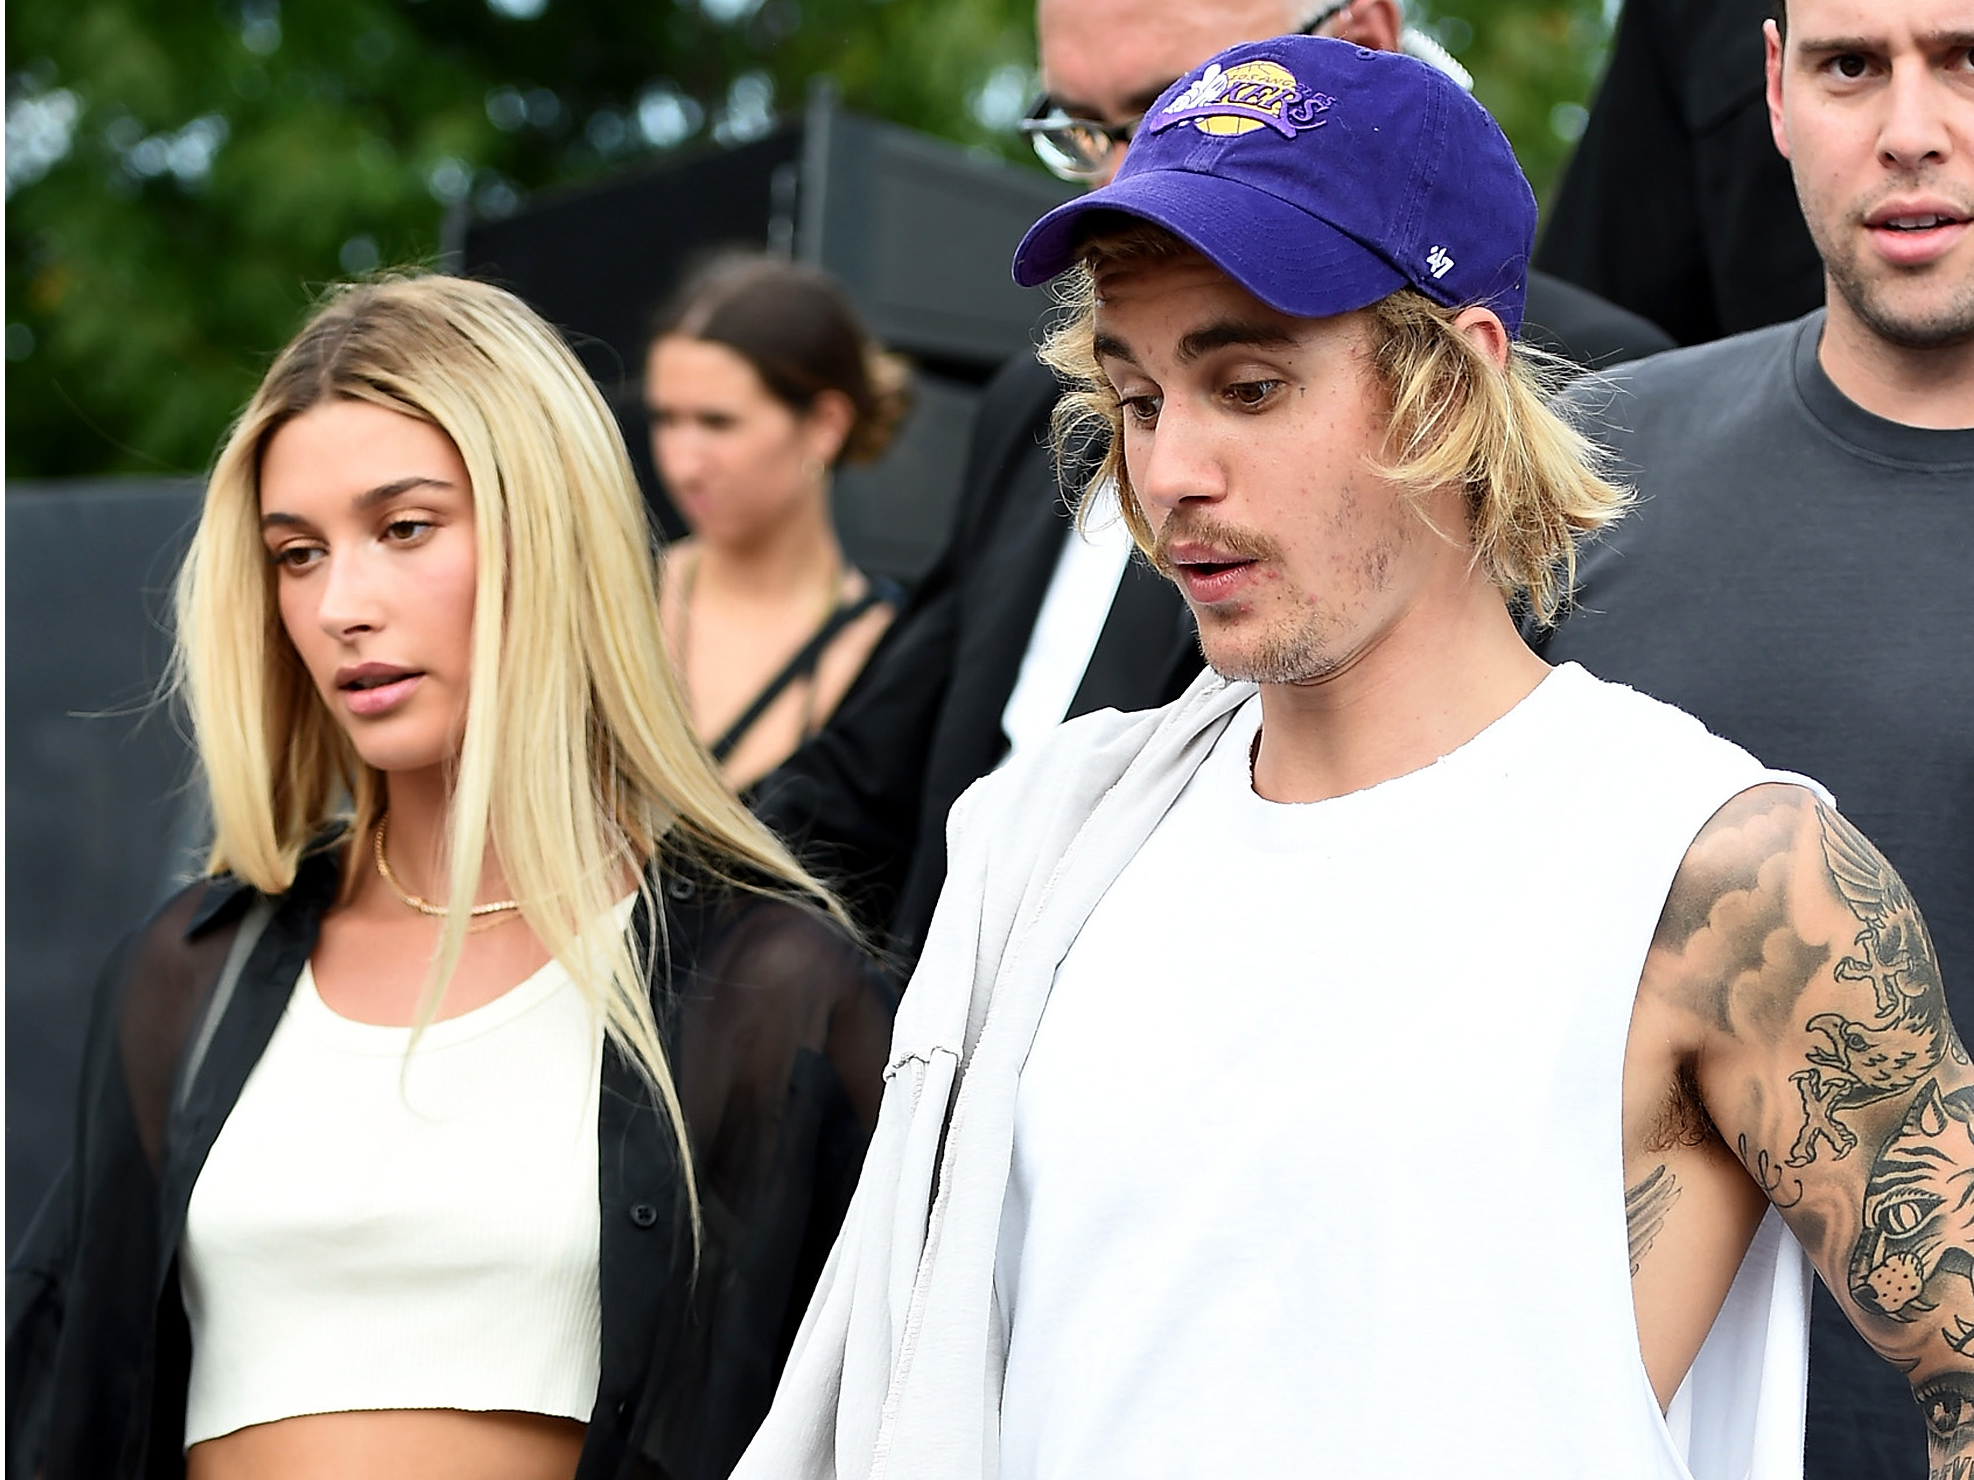 Justin Bieber and Hailey Bieber had intially planned to get married in March 2019